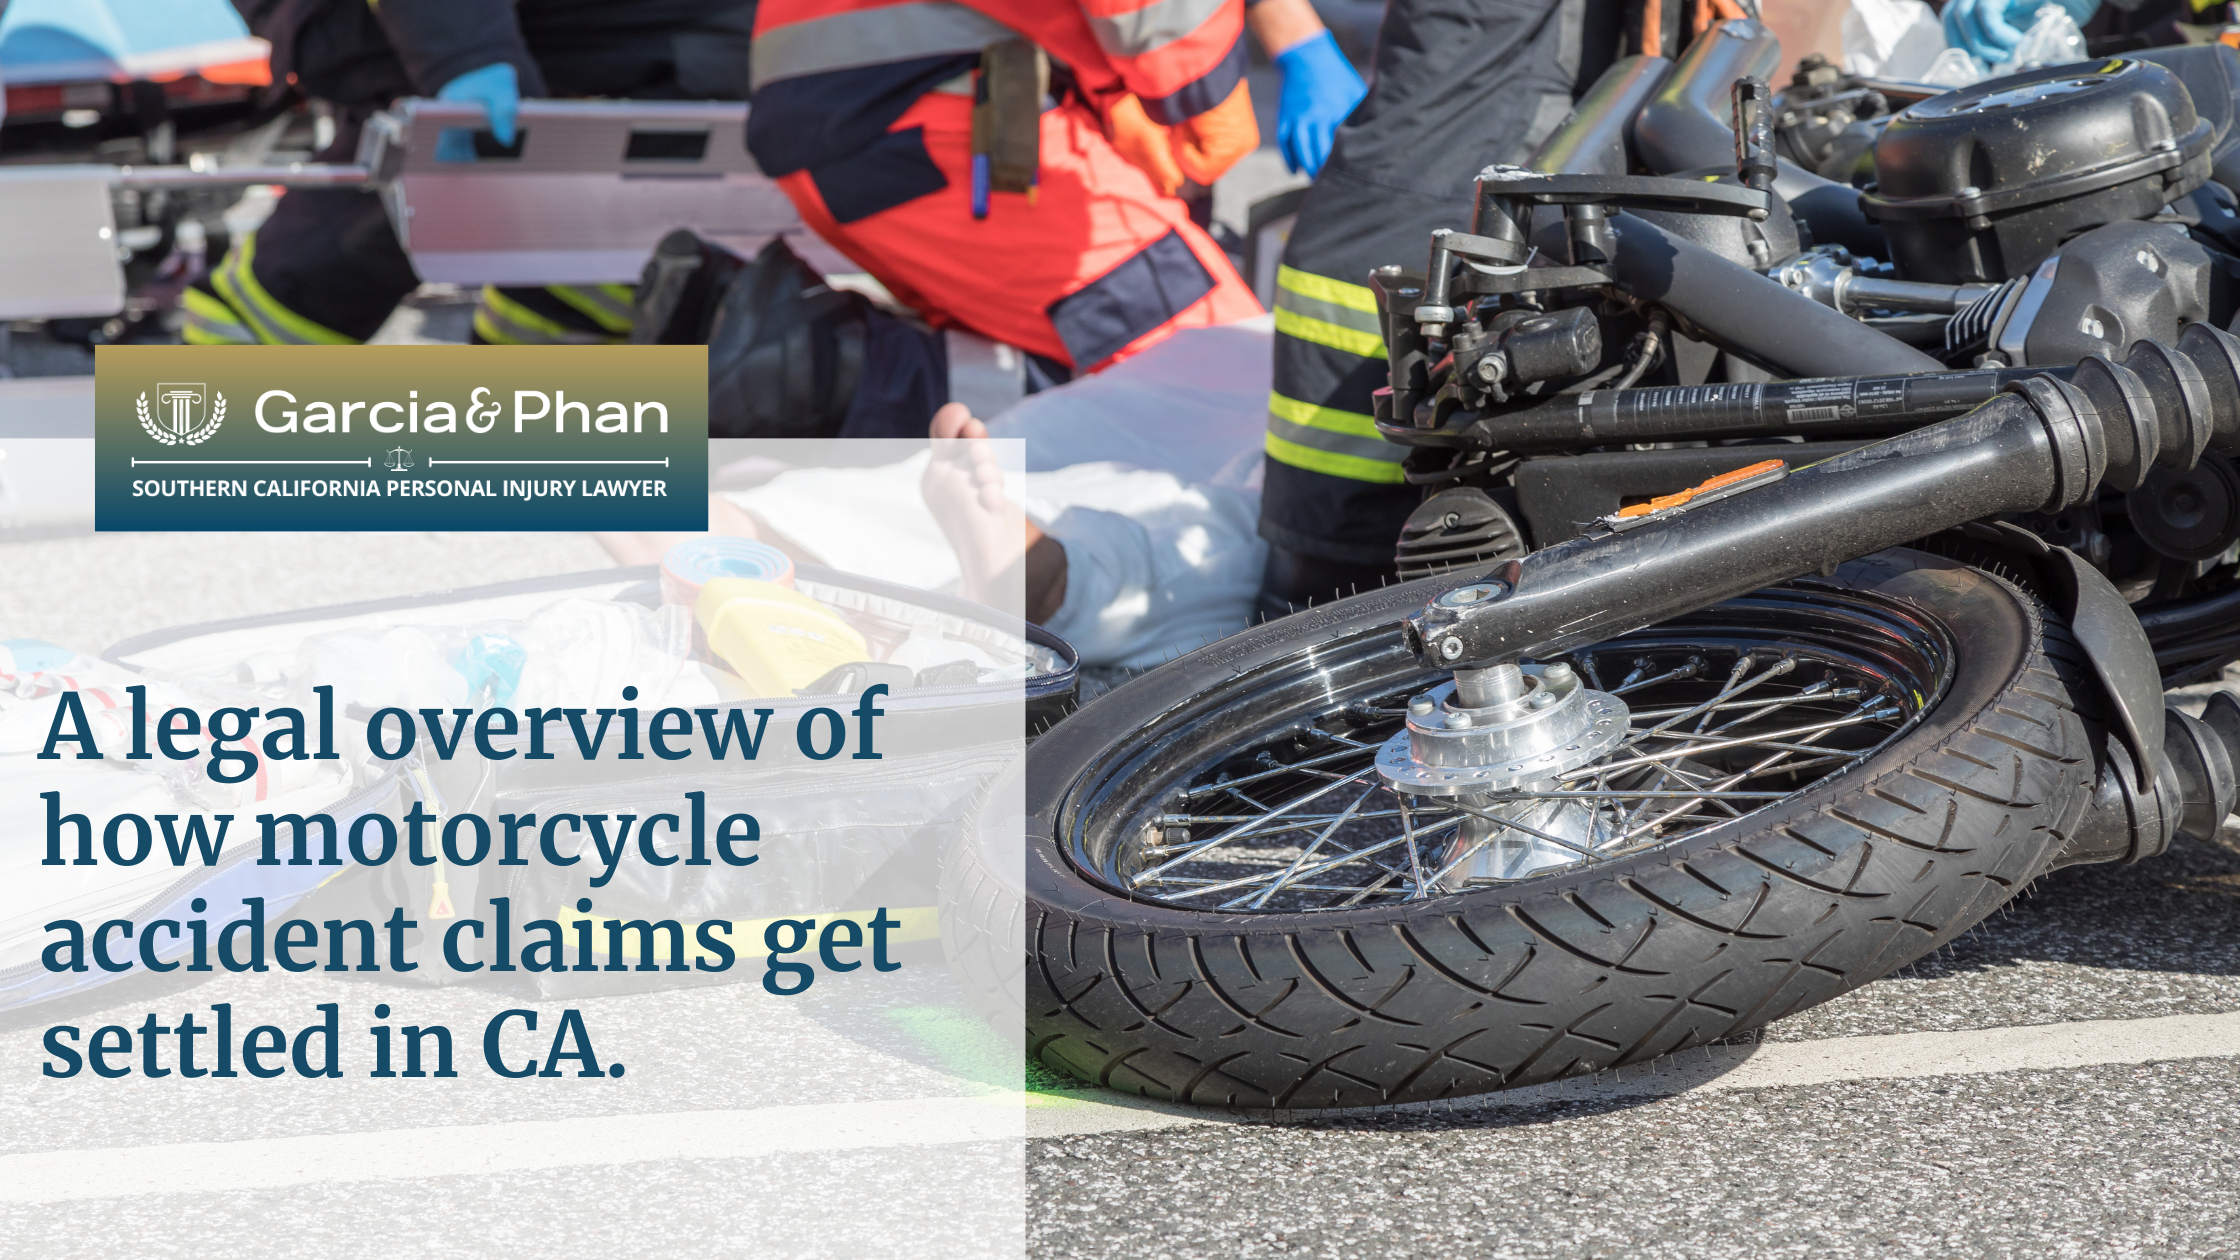 A legal overview of how motorcycle accident claims get settled in CA. (1) | GP